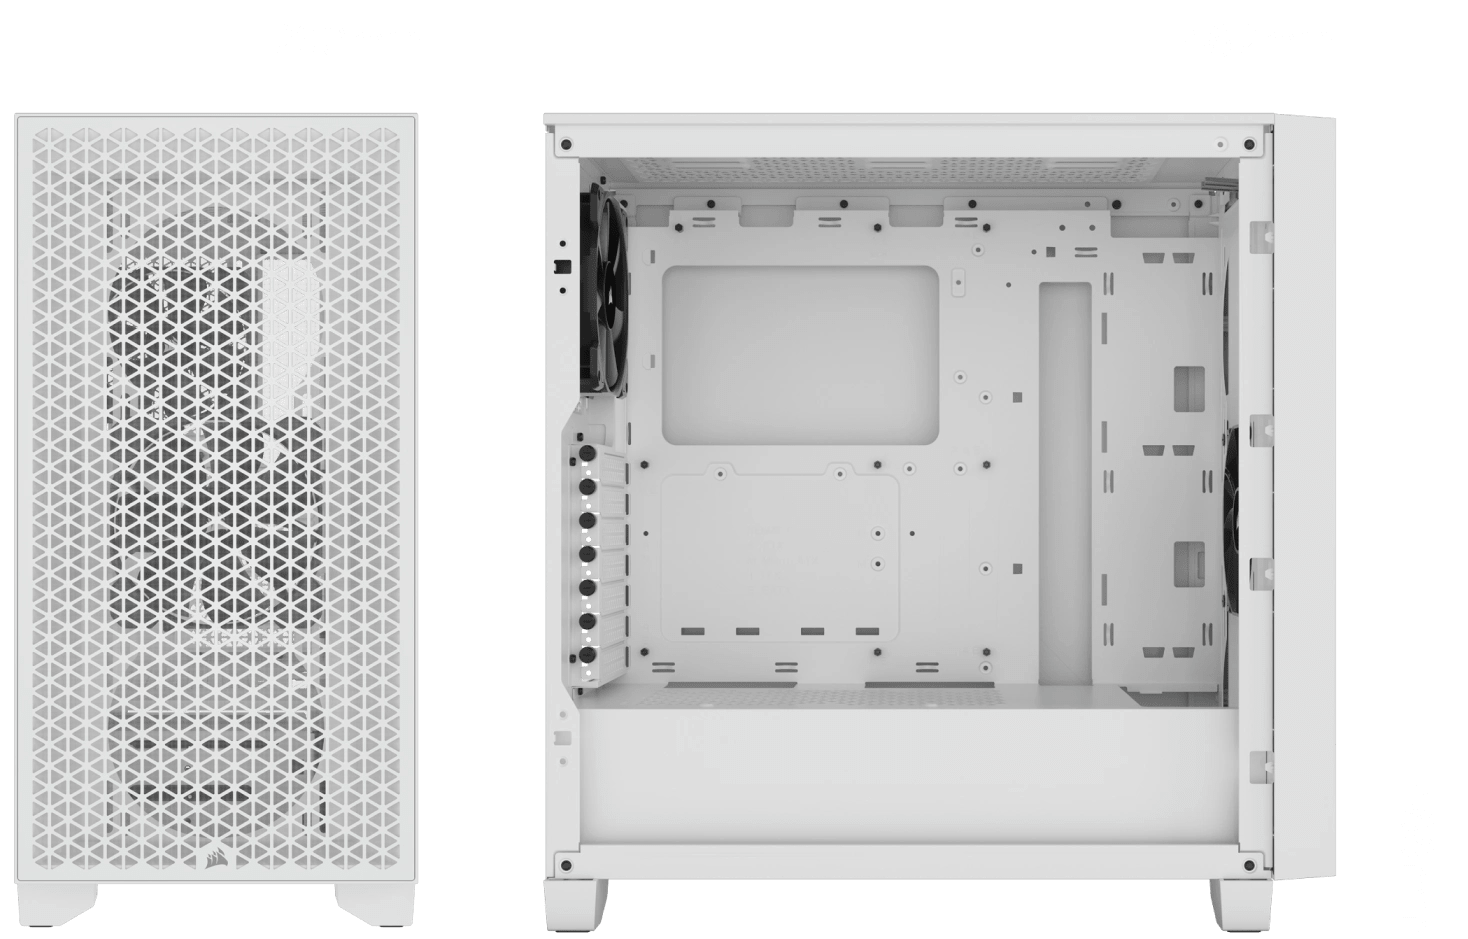 Head-on view of empty 3000D RGB AIRFLOW PC case showing fan capacity.